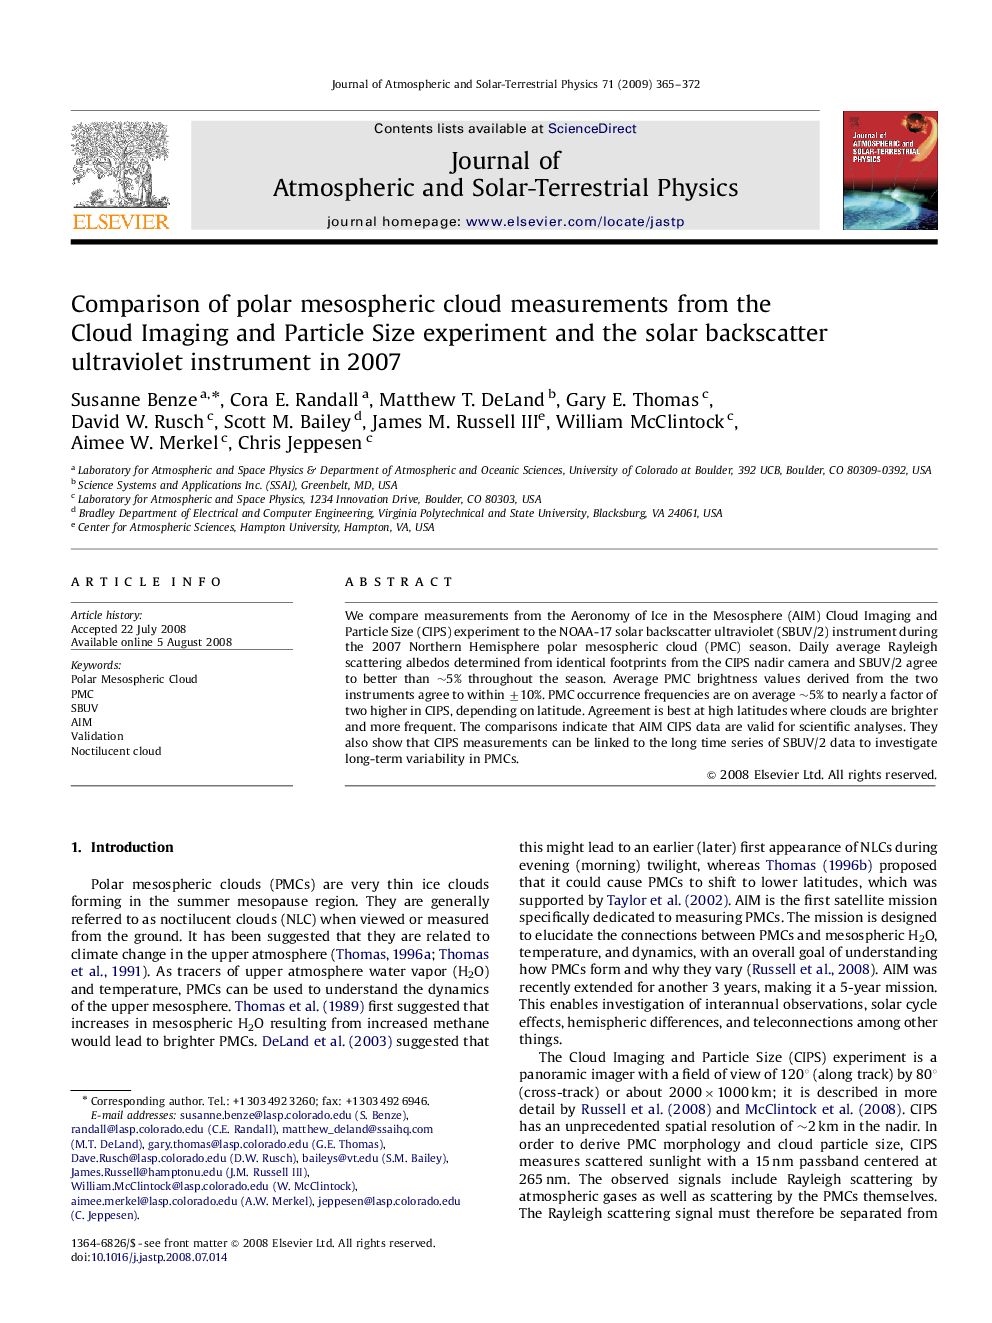 Comparison of polar mesospheric cloud measurements from the Cloud Imaging and Particle Size experiment and the solar backscatter ultraviolet instrument in 2007